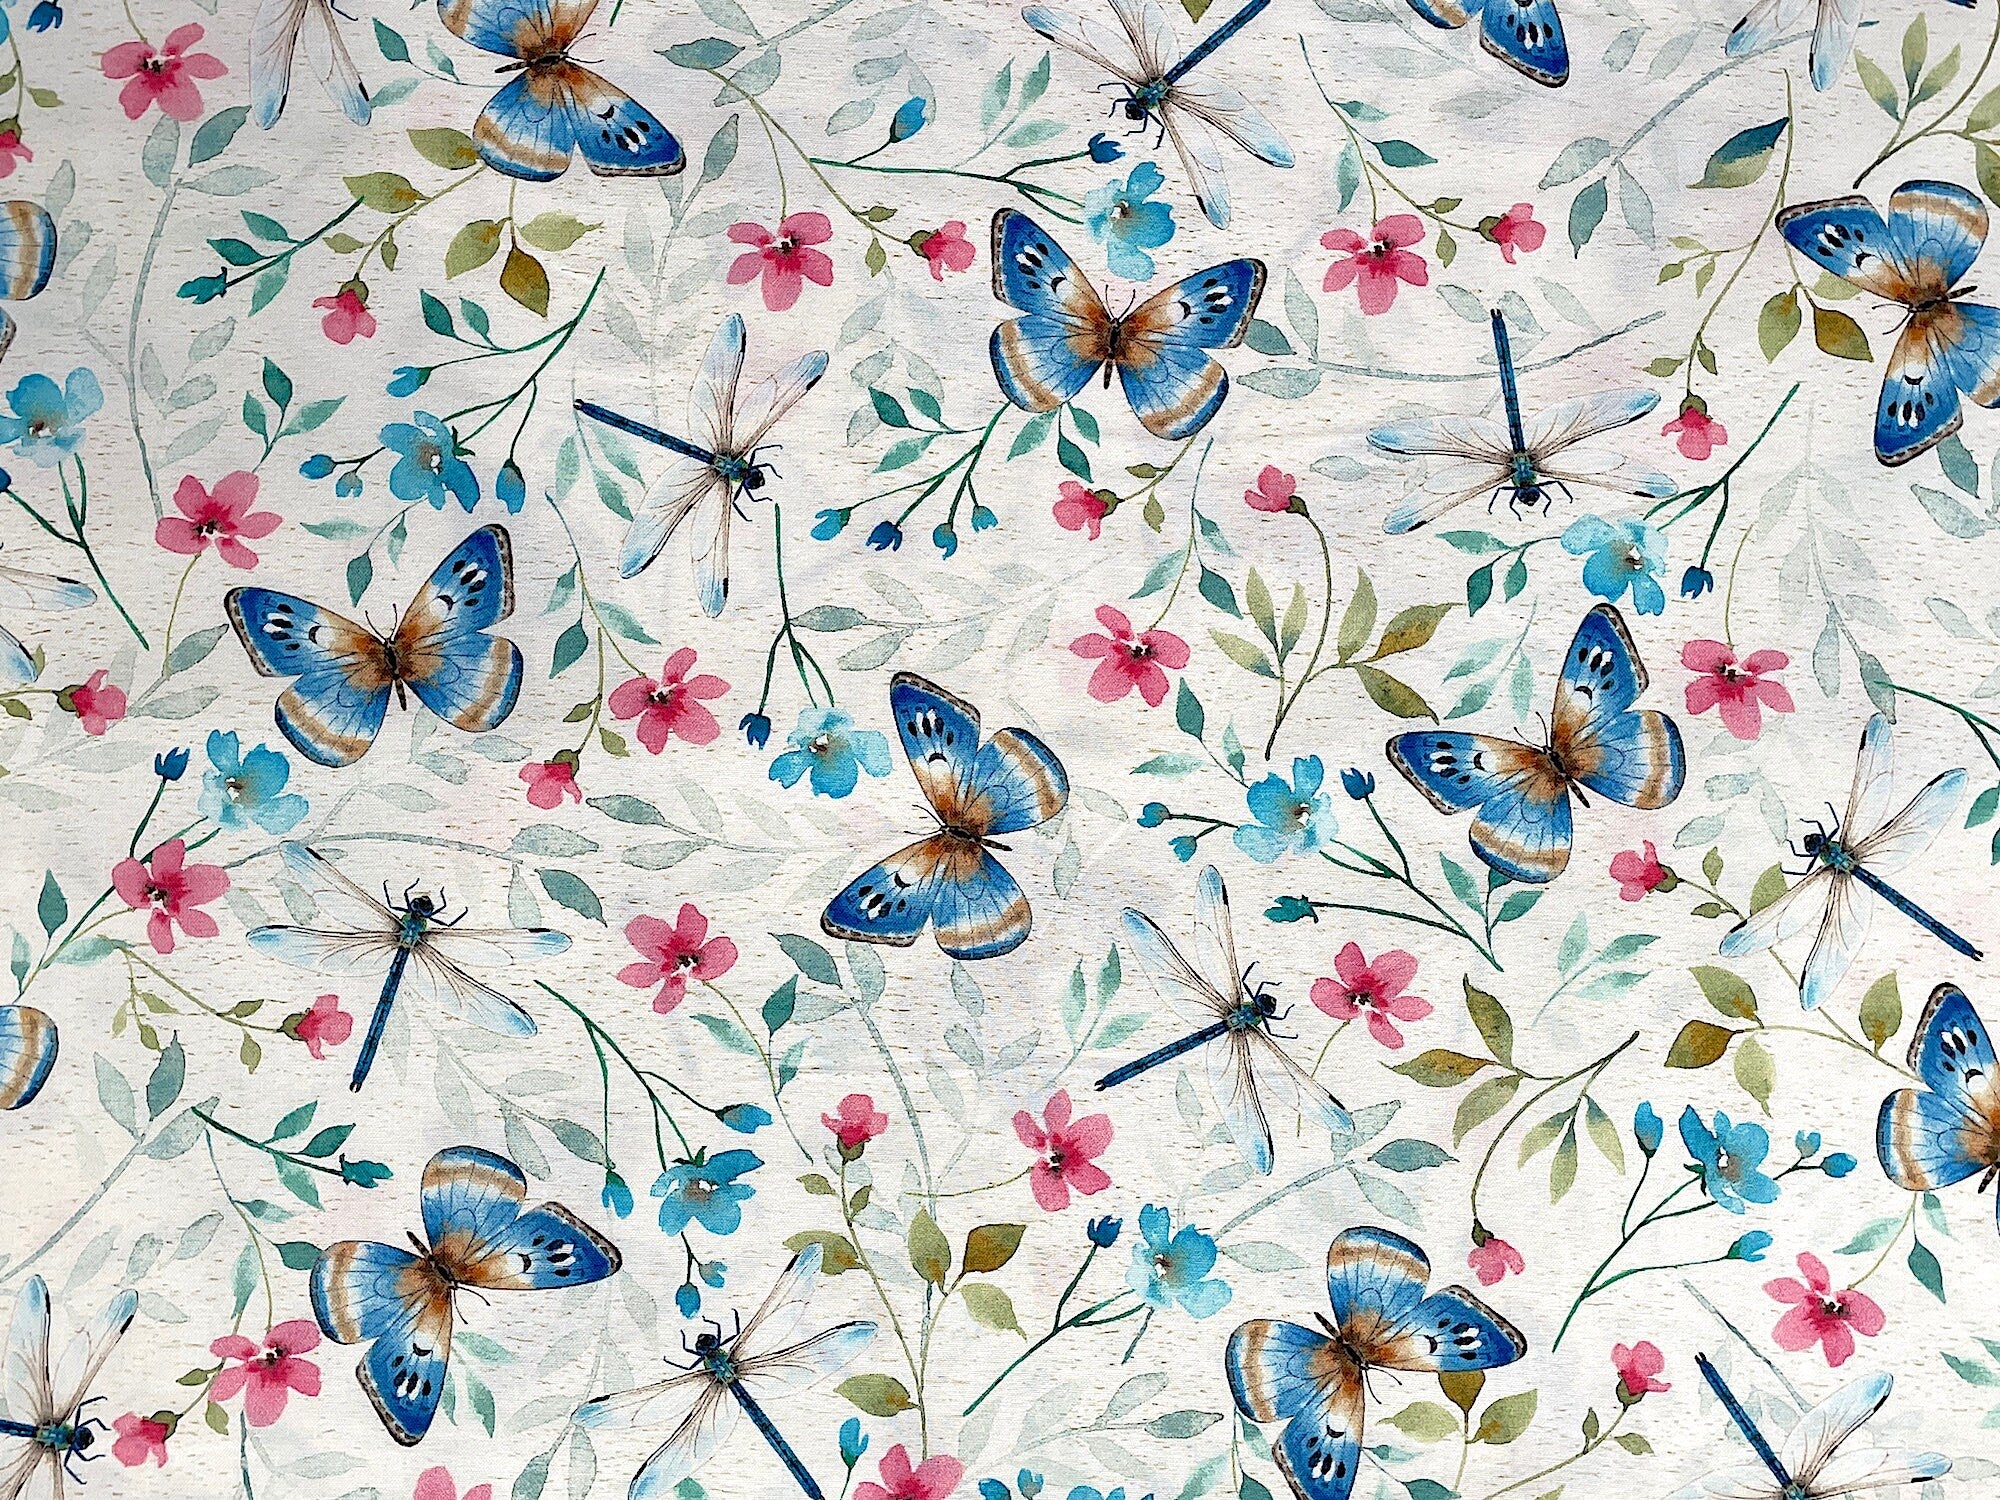 Cream fabric covered with butterflies, dragonflies and flowers.